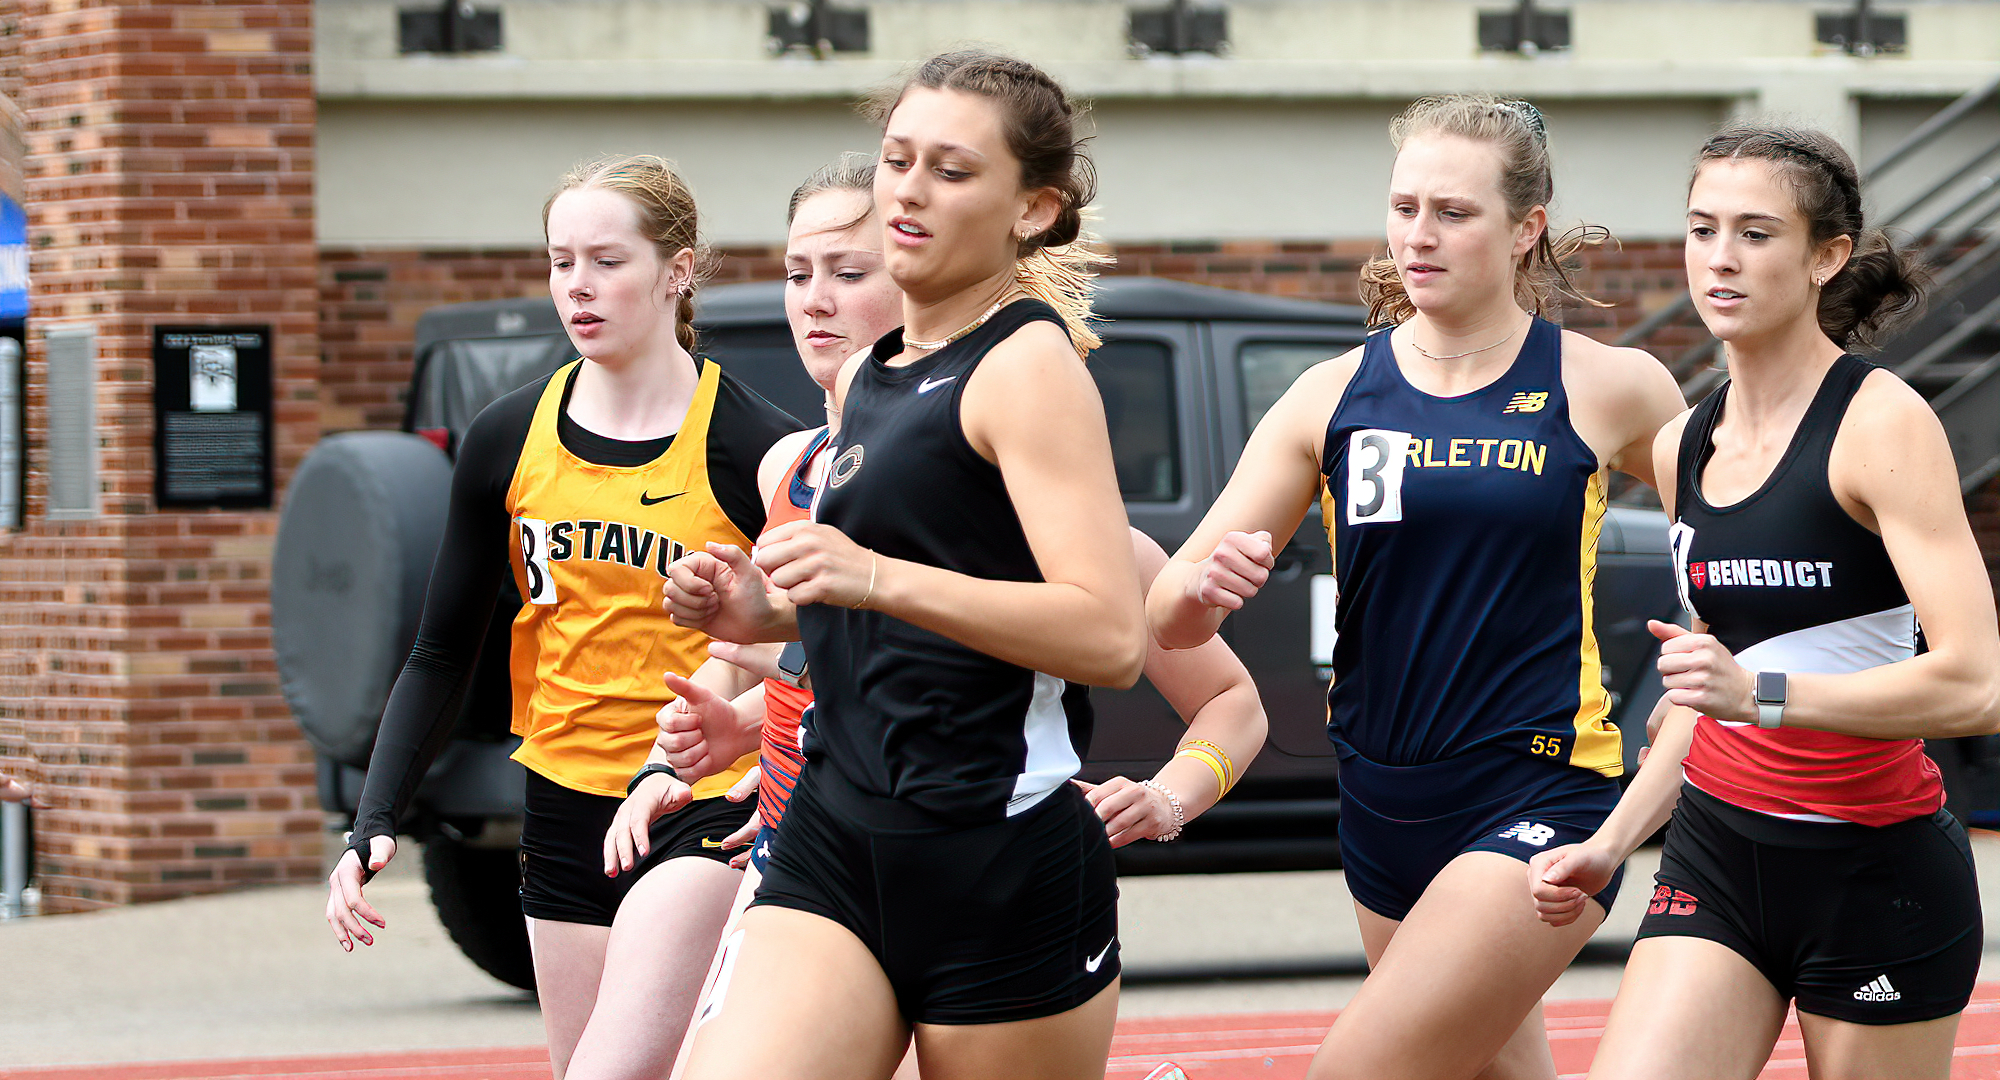 Peyton Selle leads a pack of runners in the 800 meters in the MIAC heptathlon at Carleton (Photo courtesy of Carleton Sports Info Dept.)